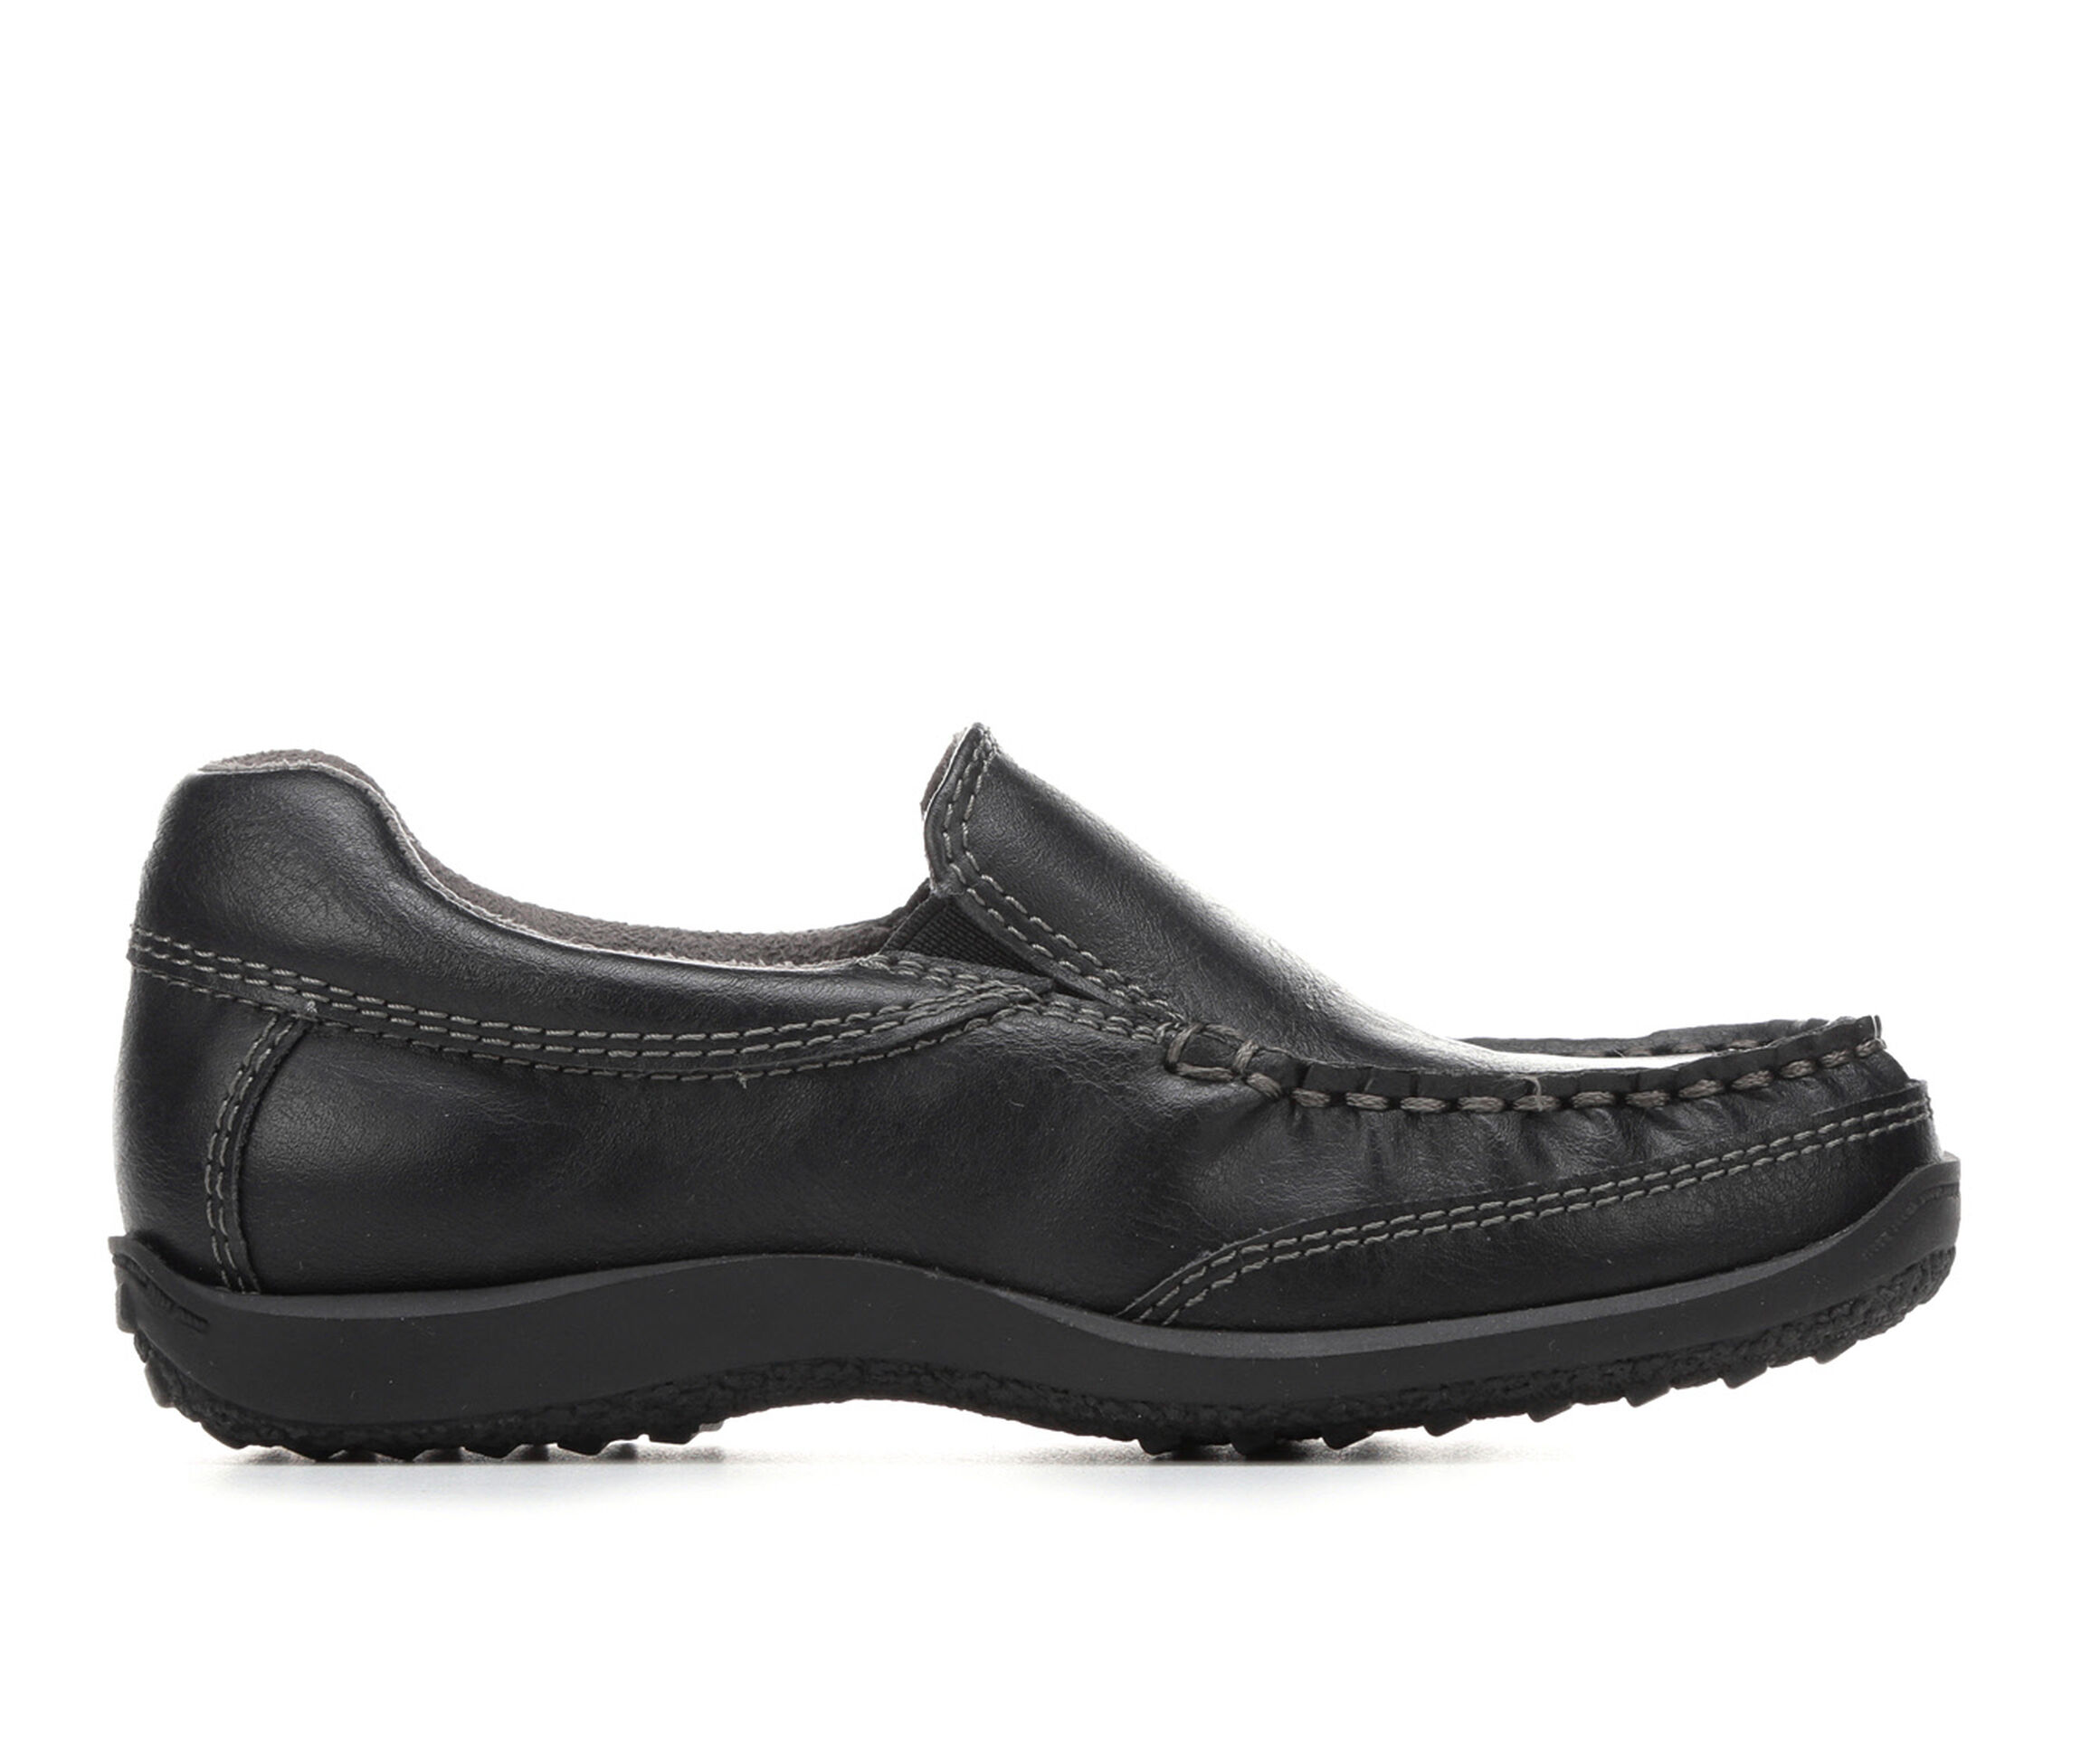 Jumping Bean  Boys Dress Casual Shoes Black Size 11 MSRP $ 35.99 